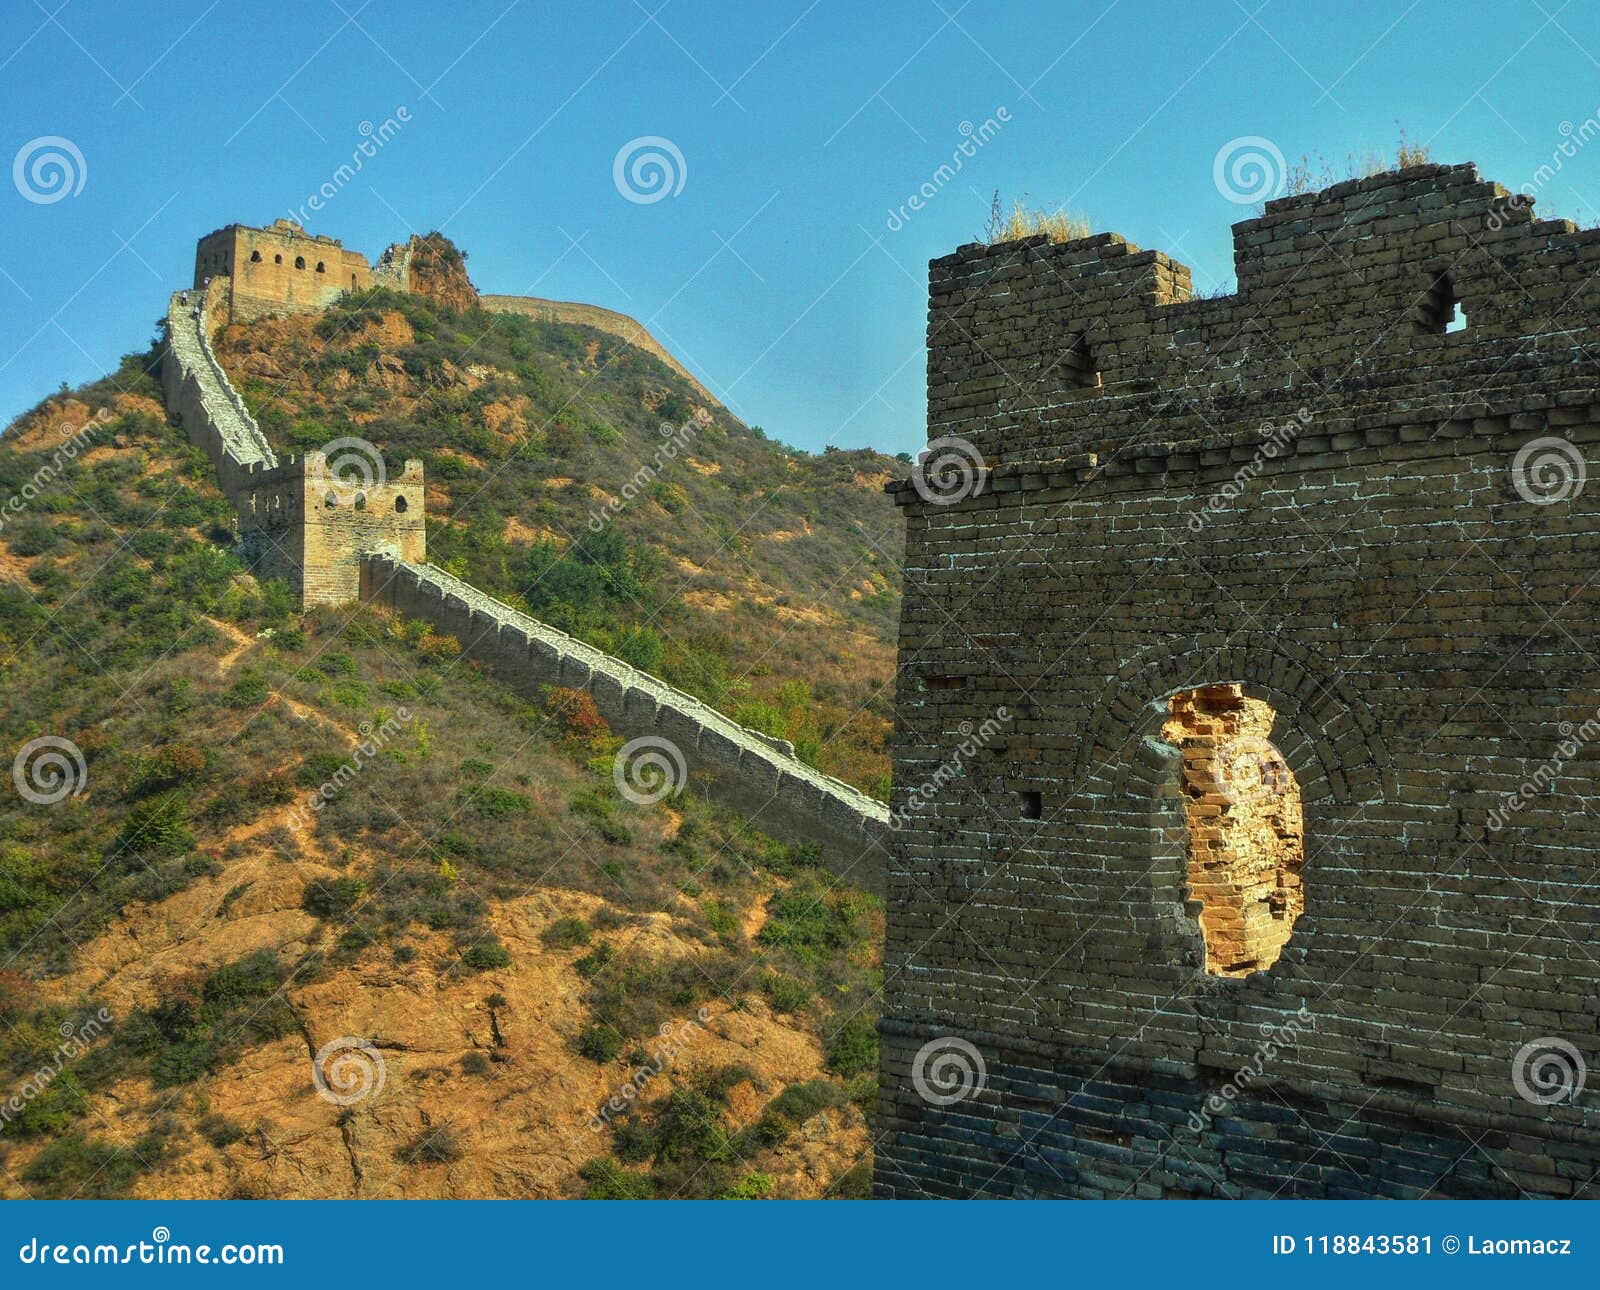 The Chinese Great Wall Near Beijing Stock Image - Image of clouds, fortress: 118843581